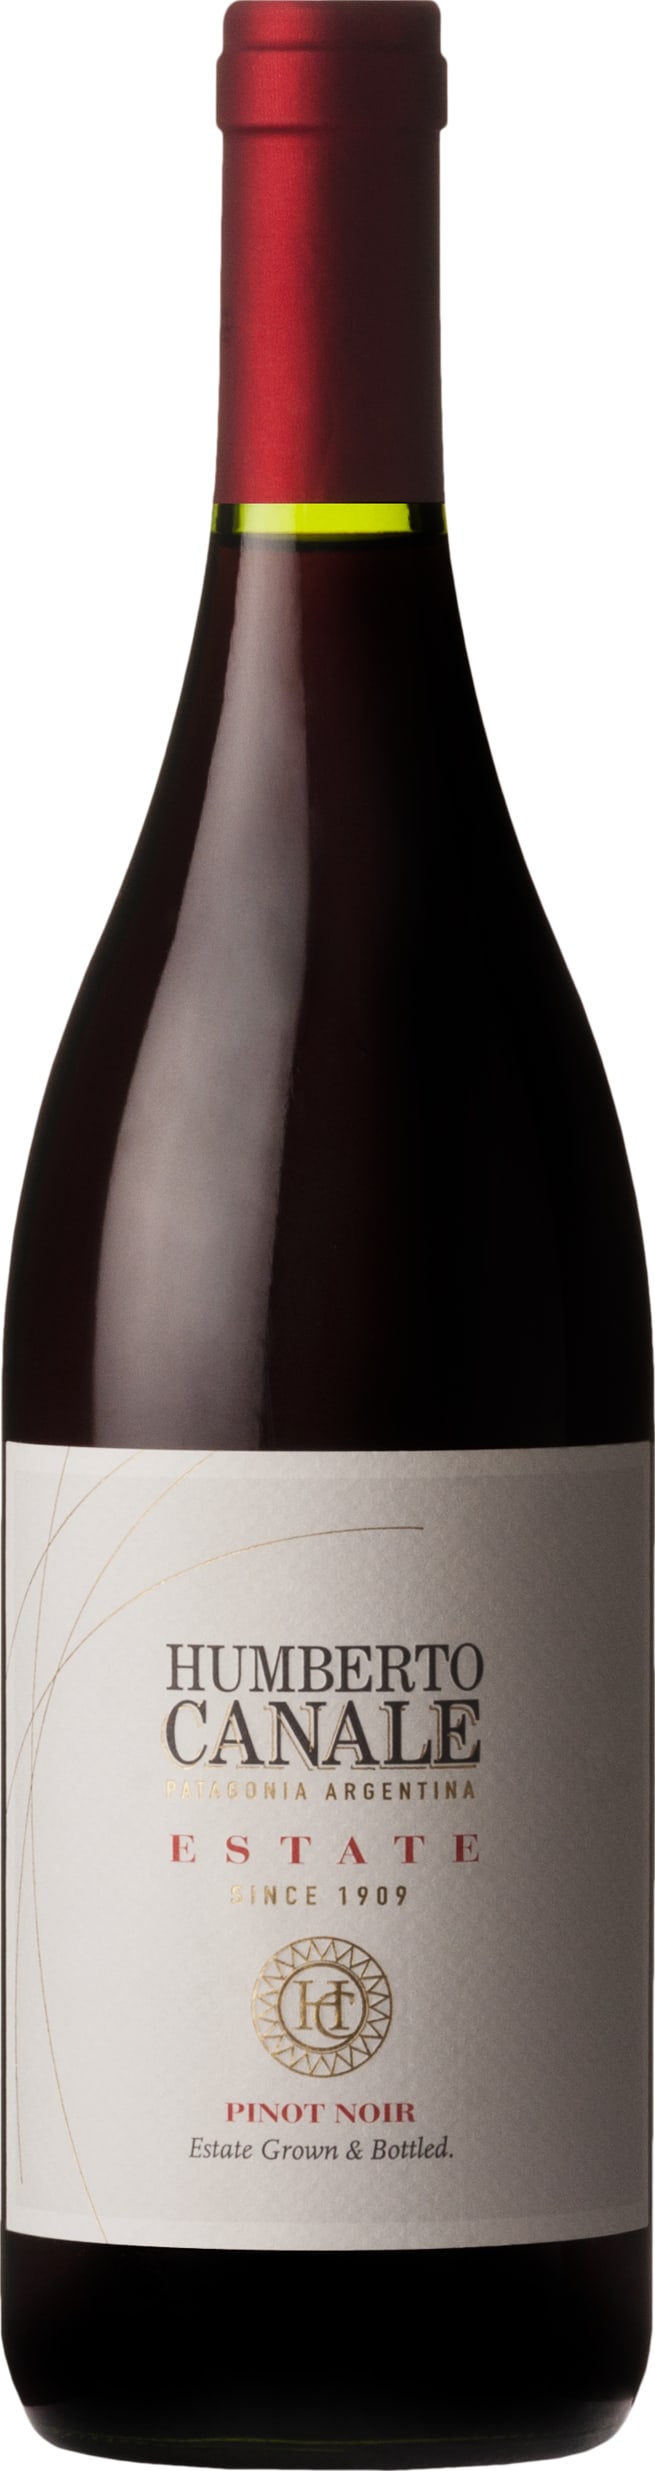 Humberto Canale Estate Pinot Noir 2023 75cl - Buy Humberto Canale Wines from GREAT WINES DIRECT wine shop